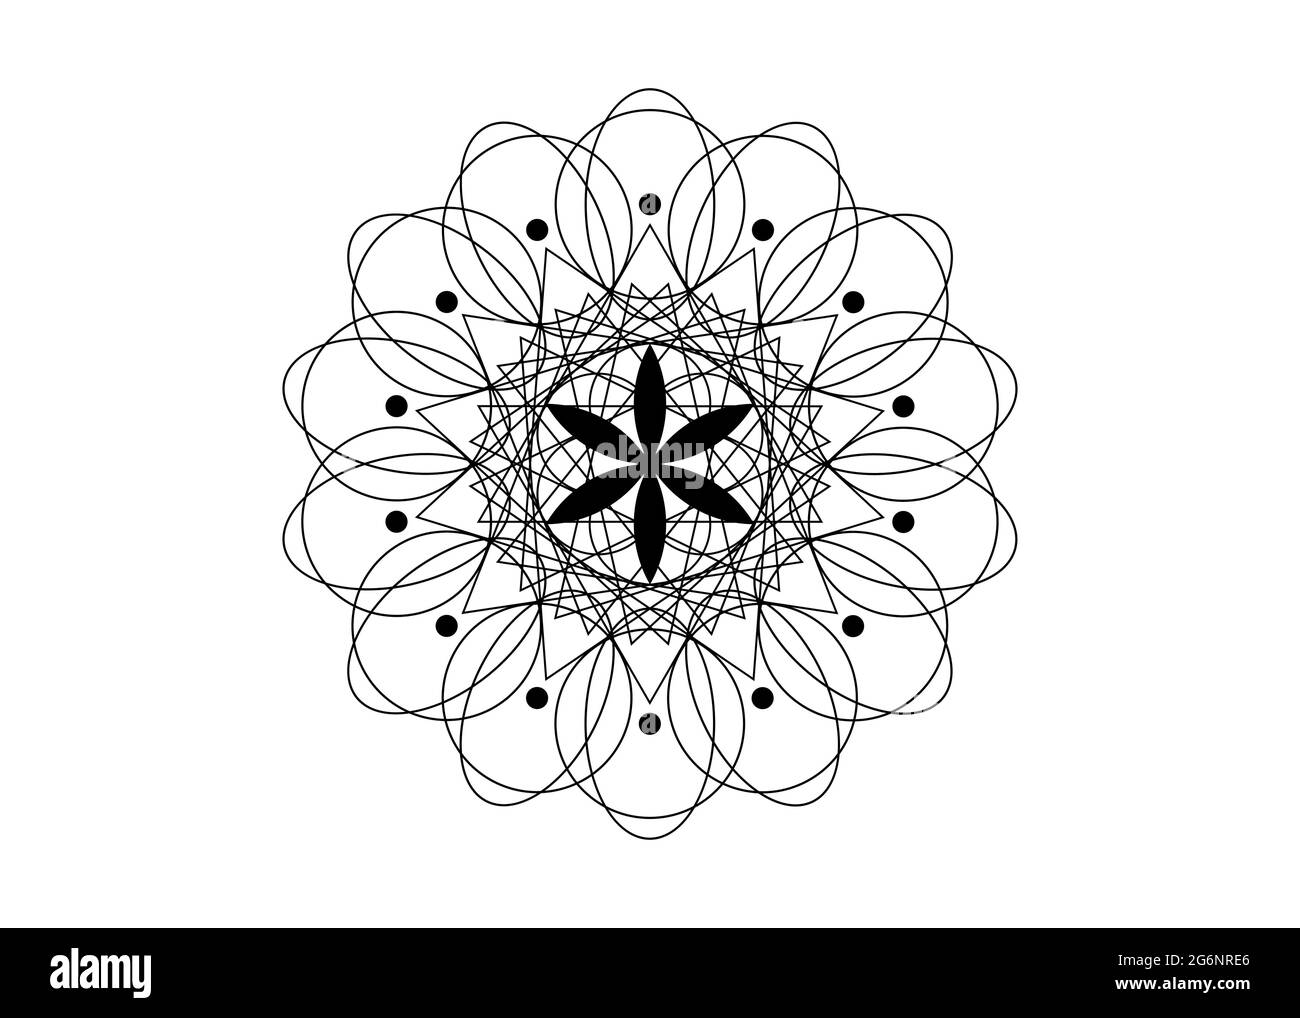 100 Flower Of Life Tattoo Designs For Men  Geometrical Ink Ideas